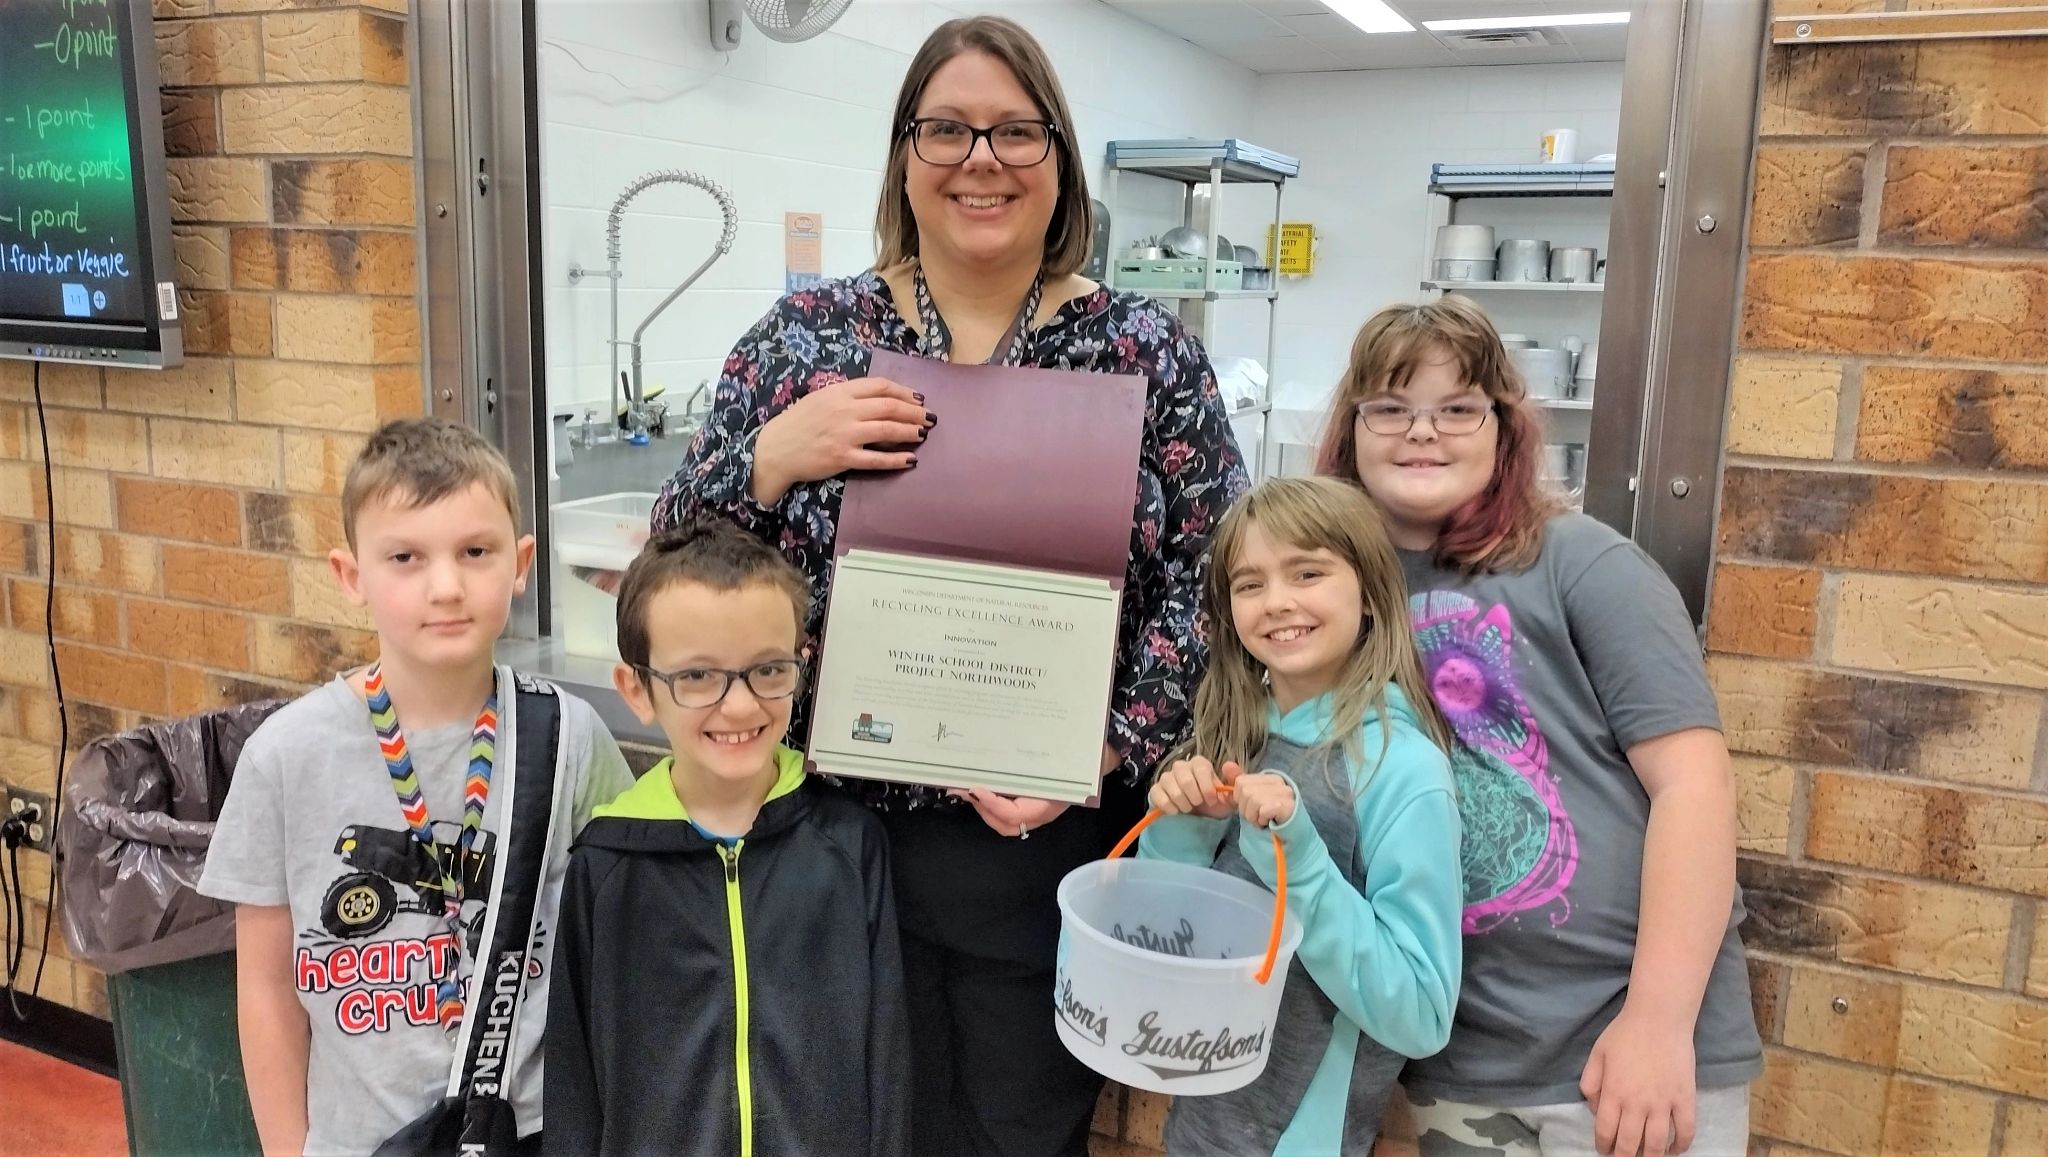 A representative from the Winter School District hold the district's 2023 Wisconsin Recycling Excellence Award certificate from the DNR. She is surrounded by four children from the district, one of whom is holding an empty ice cream bucket that the school uses to collect fruit and vegetable food waste.